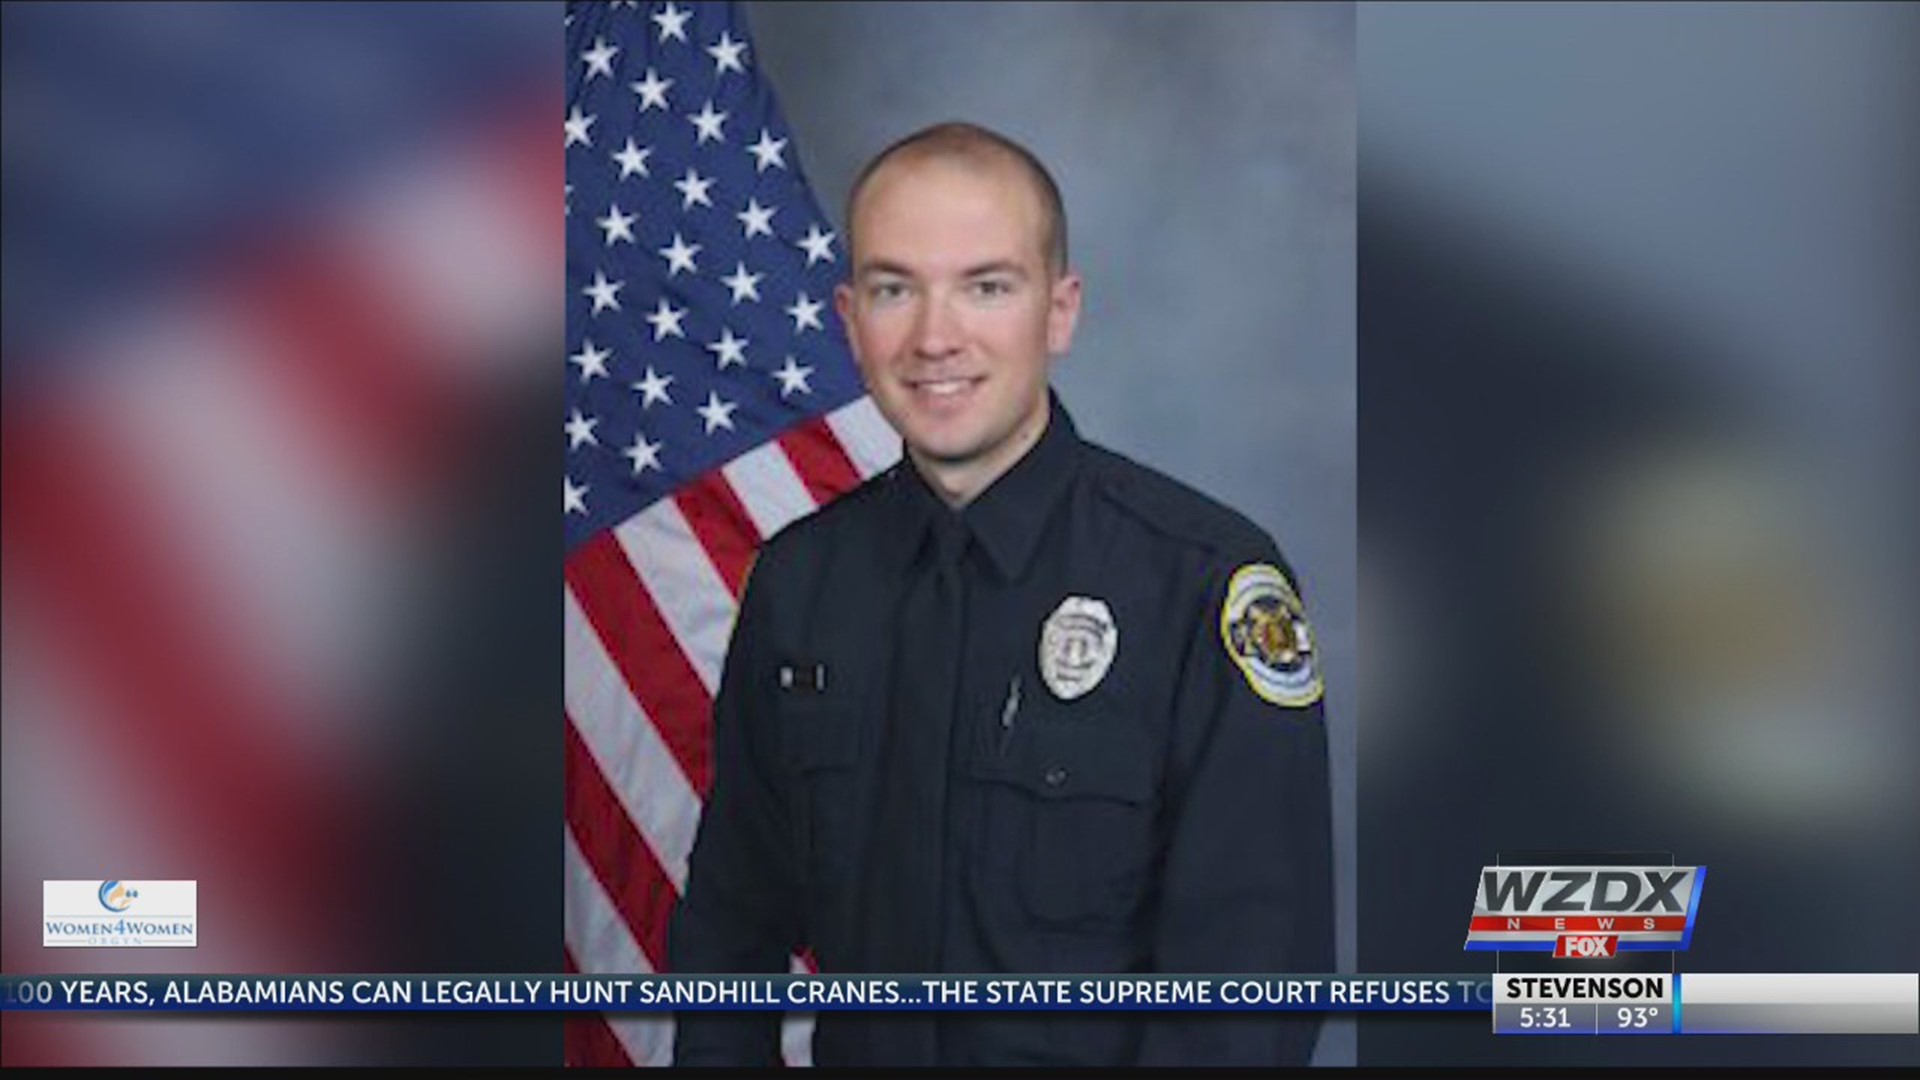 The State Supreme Court refuses to intervene on behalf of a Huntsville police officer charged with murder.